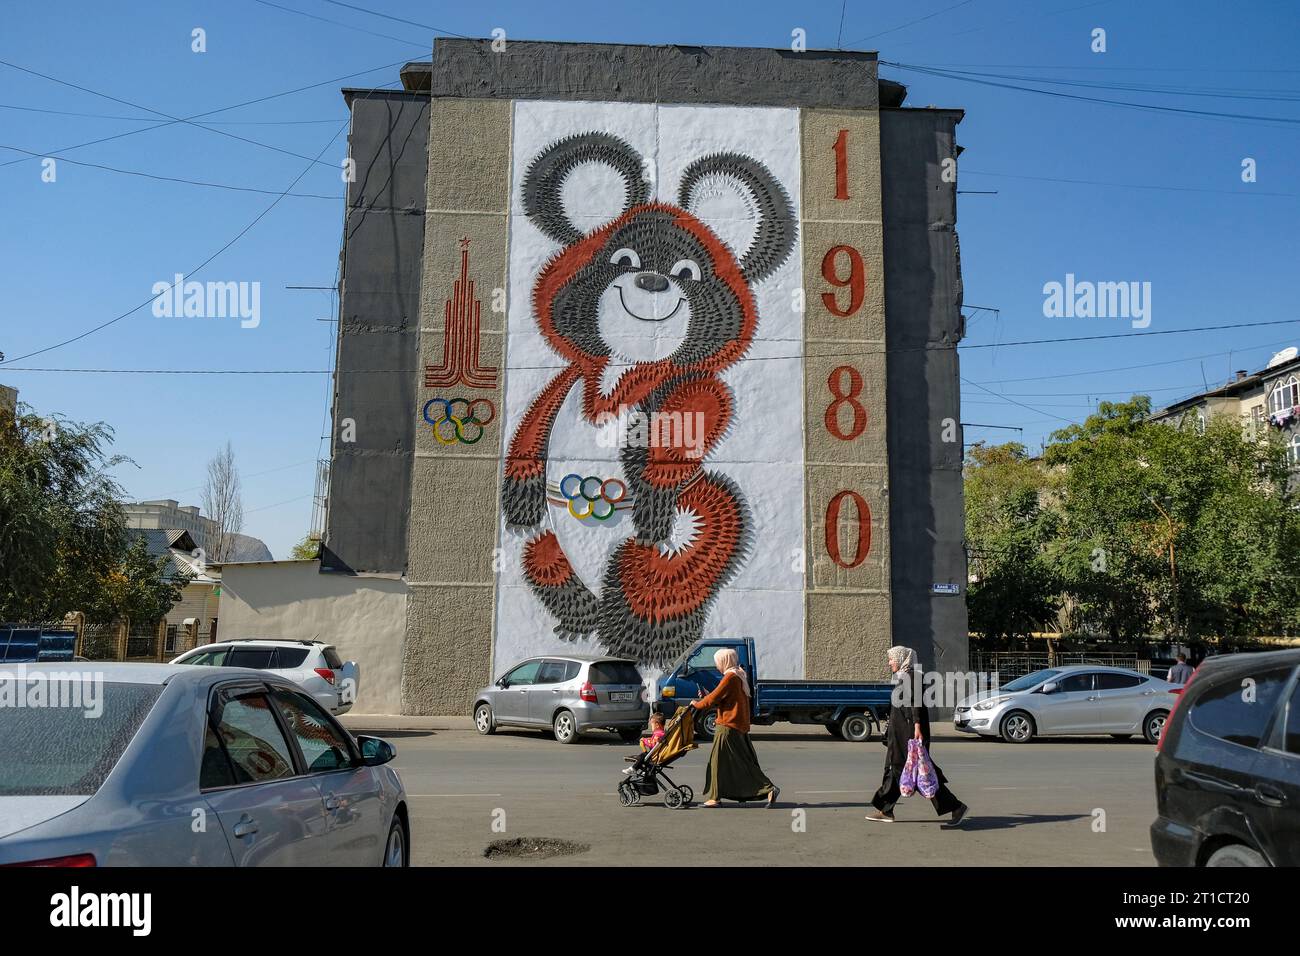 Osh, Kyrgyzstan - October 10, 2023: Mosaic of the Misha bear, mascot of the 1980 Moscow Olympic Games, in a building in Osh, Kyrgyzstan. Stock Photo